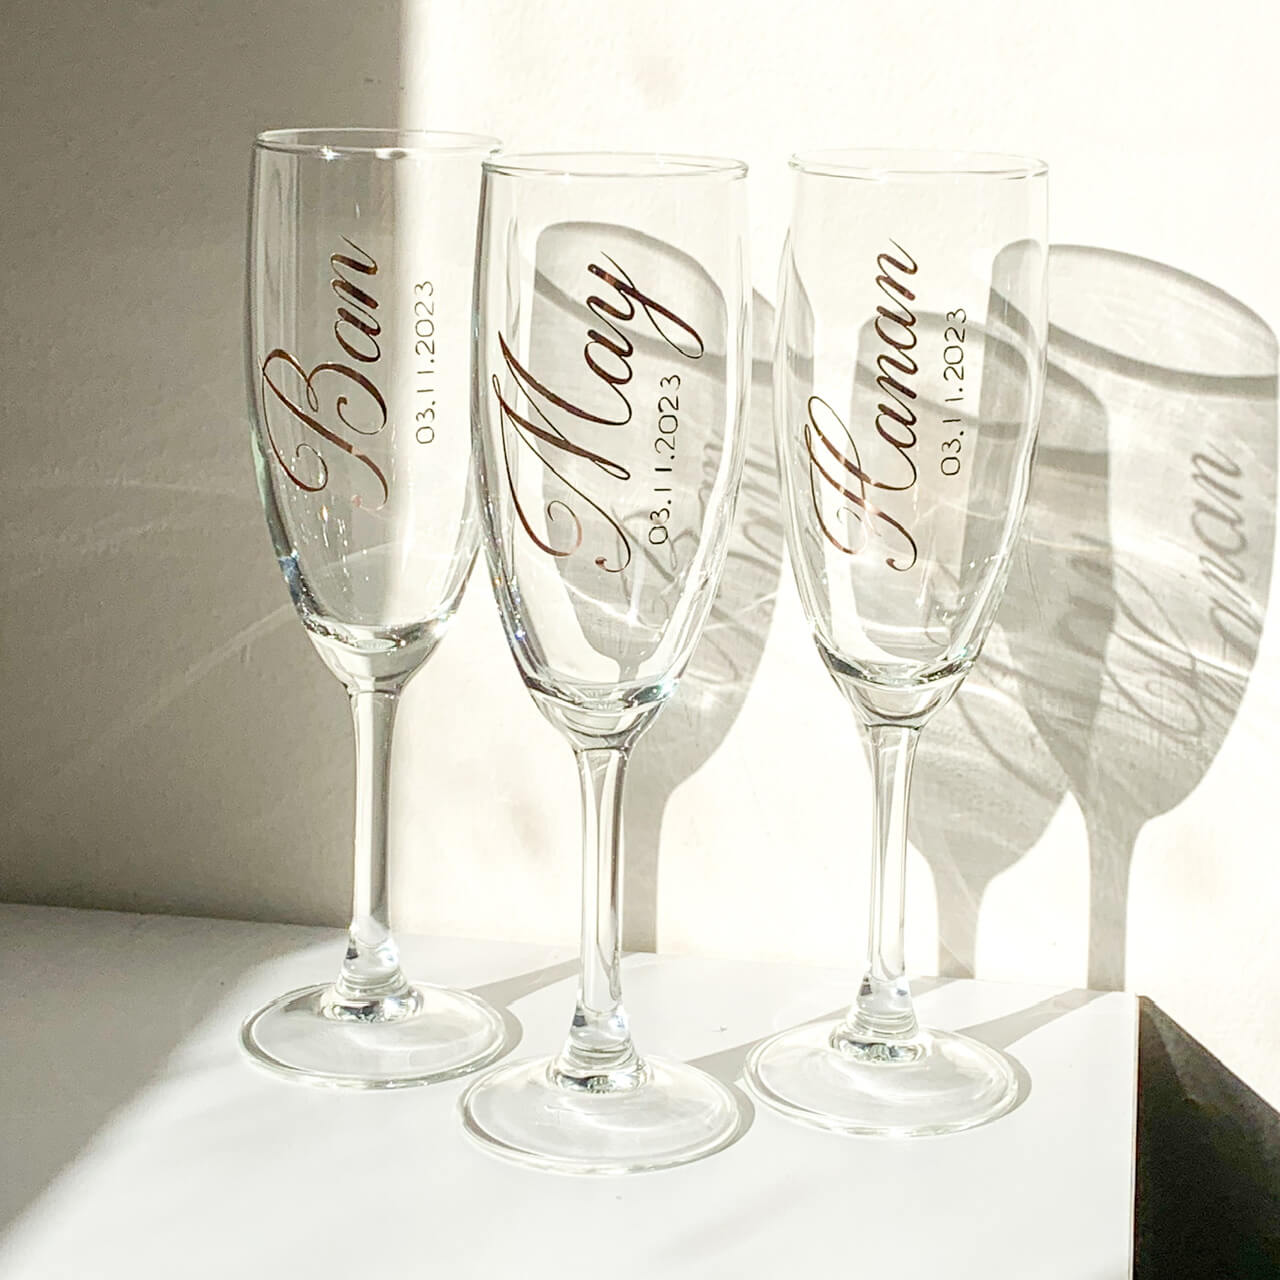 Personalised Champagne Flute Glasses